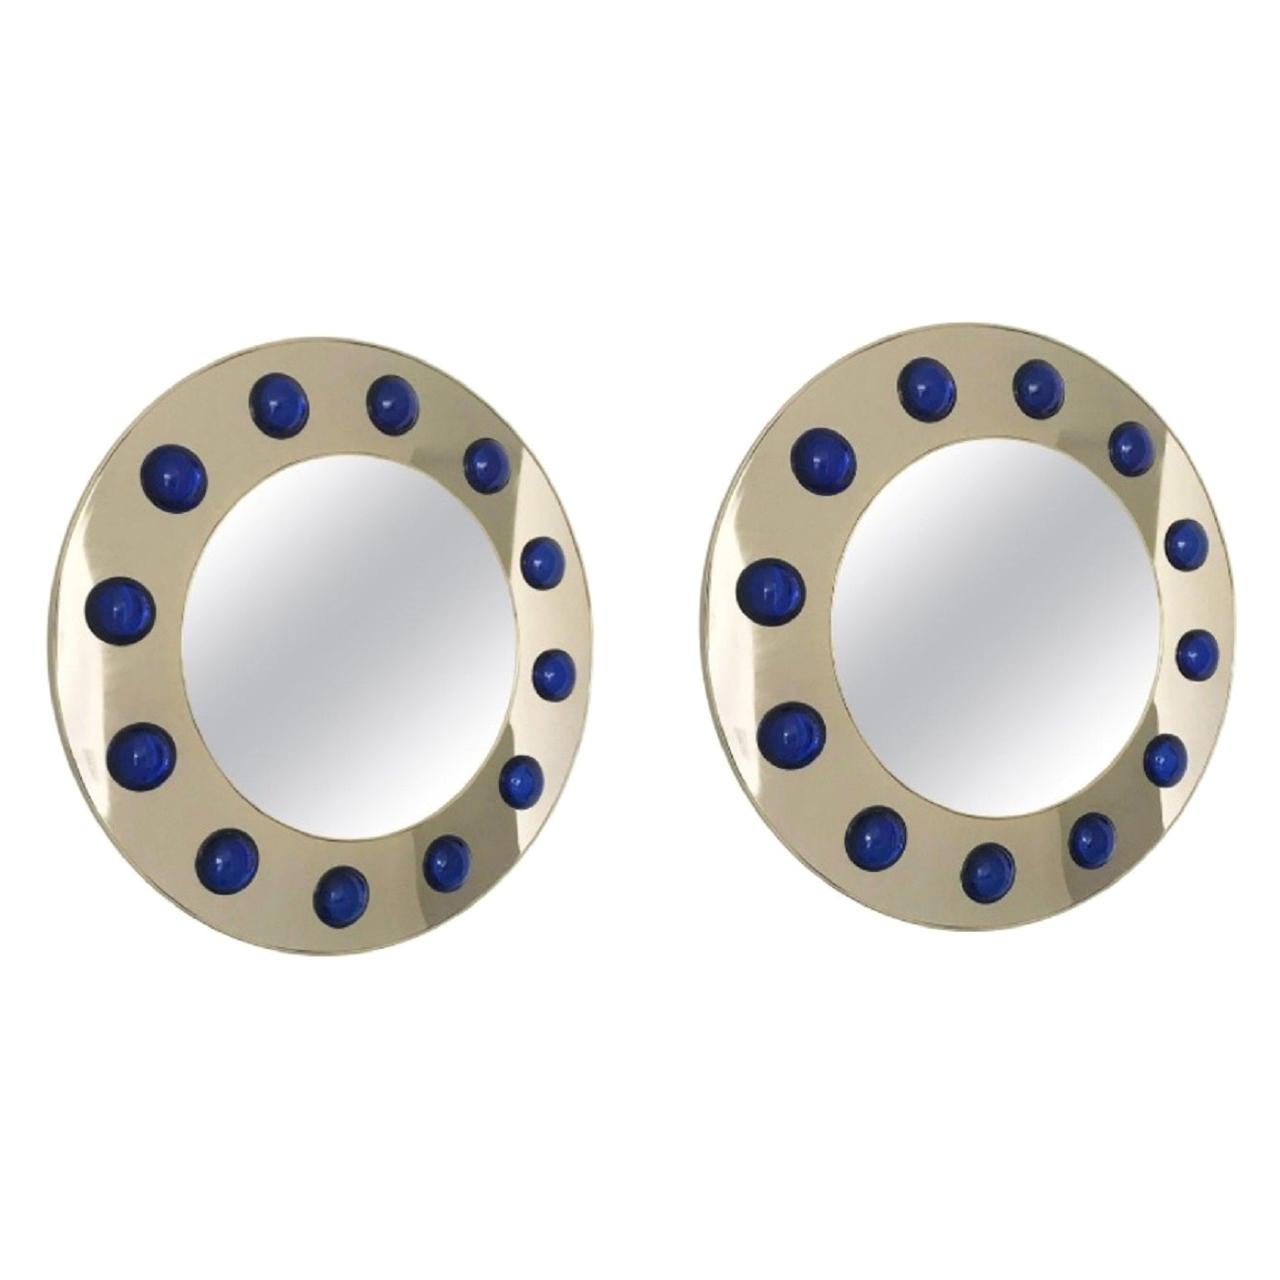 Unique Pair of Round Mirrors Polished Brass, Dark Blue Murano Glass, Italy, 1980s